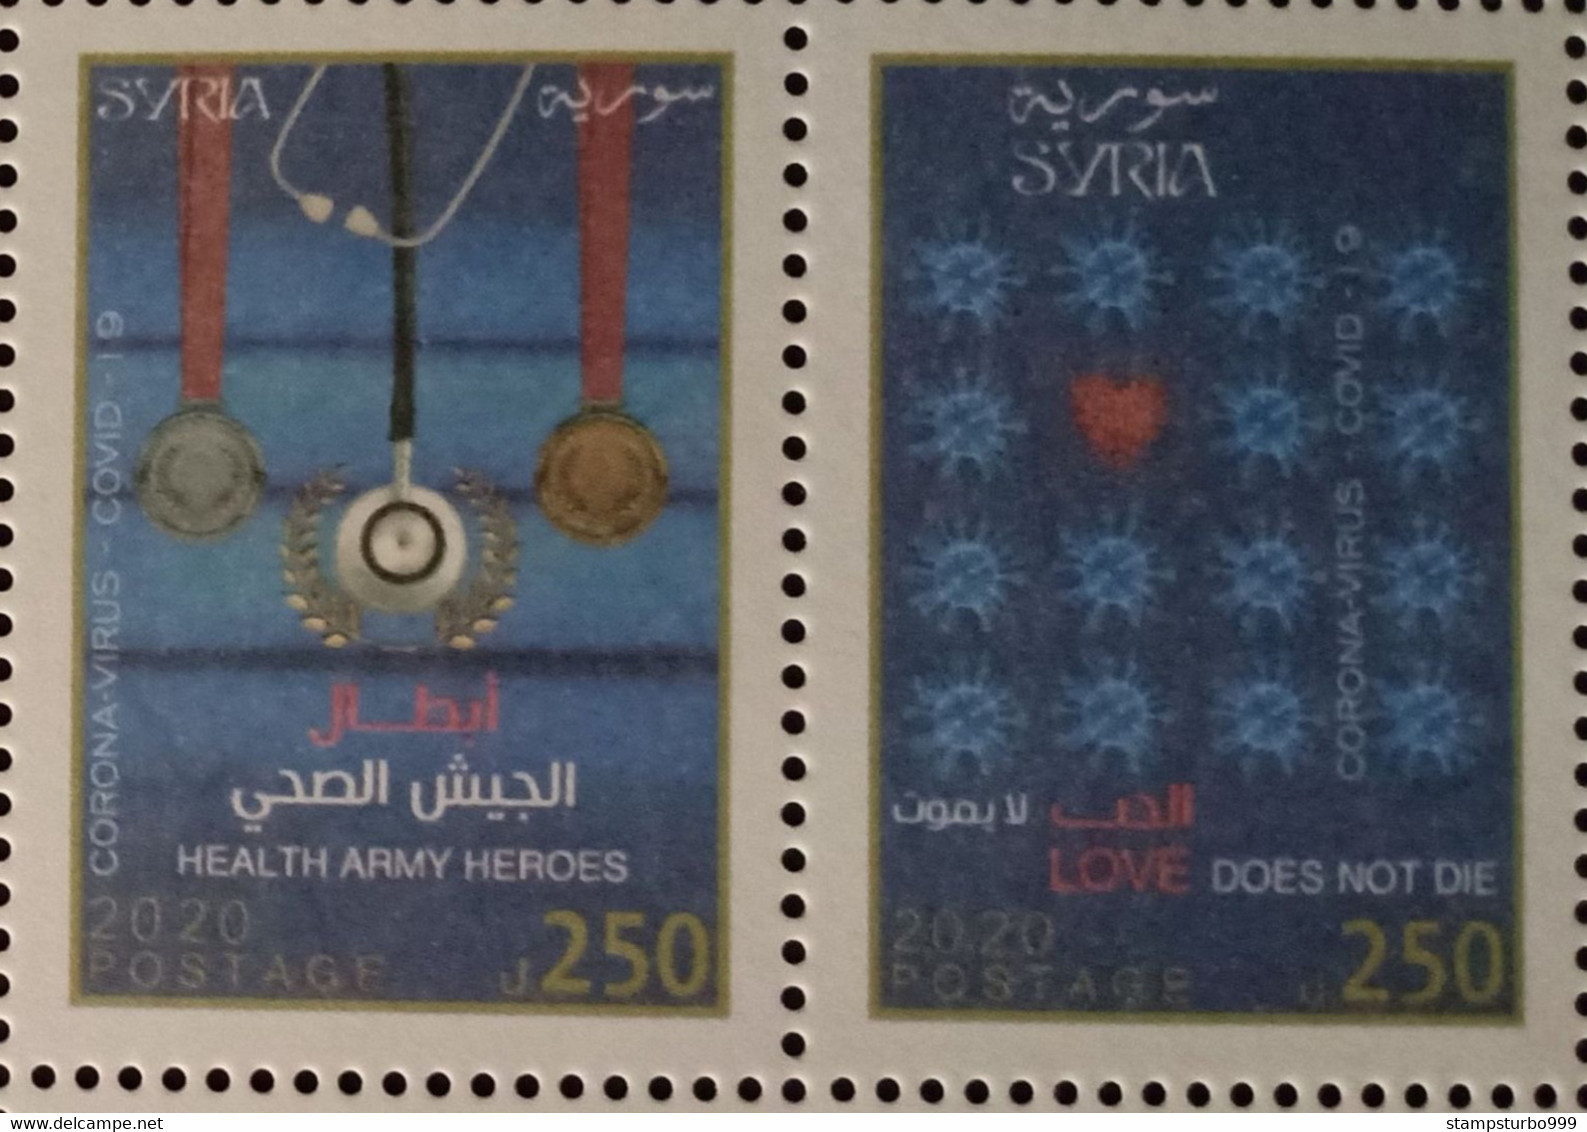 Syrien, Syrie, Syria 2020 Corona Virus (Covid-19)site As Photo, Very Rare Only 5000 Set Issued MNH ** - Ongebruikt